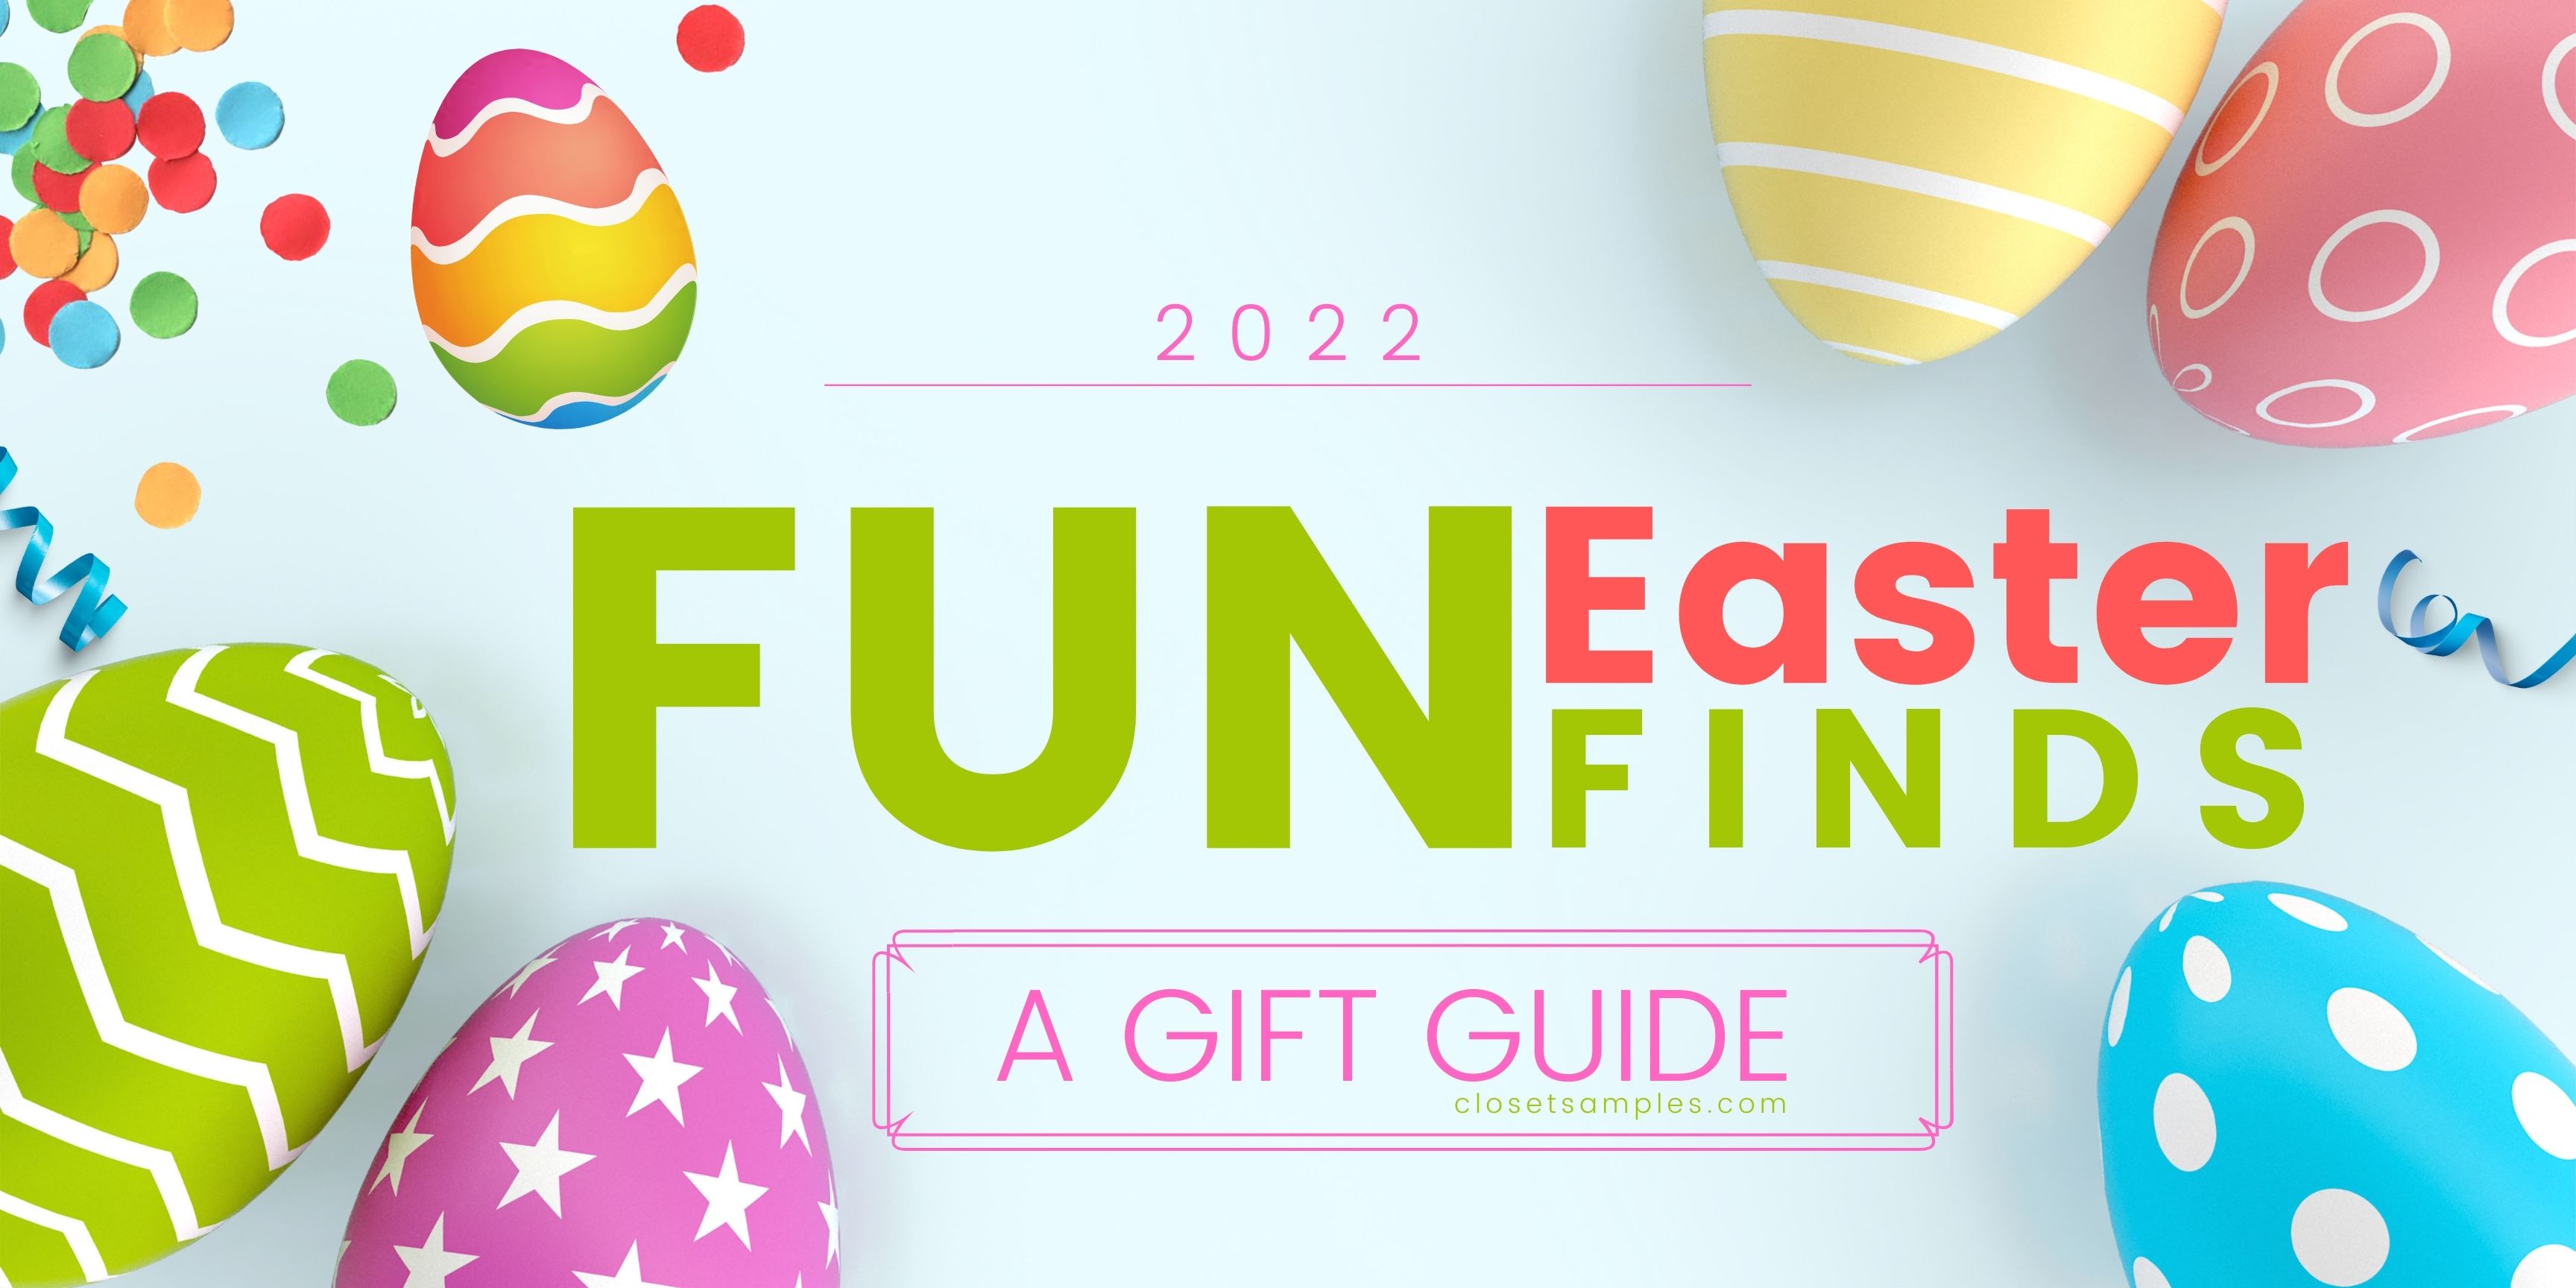 Fun Easter Finds for 2022 A Gift Guide Closetsamples